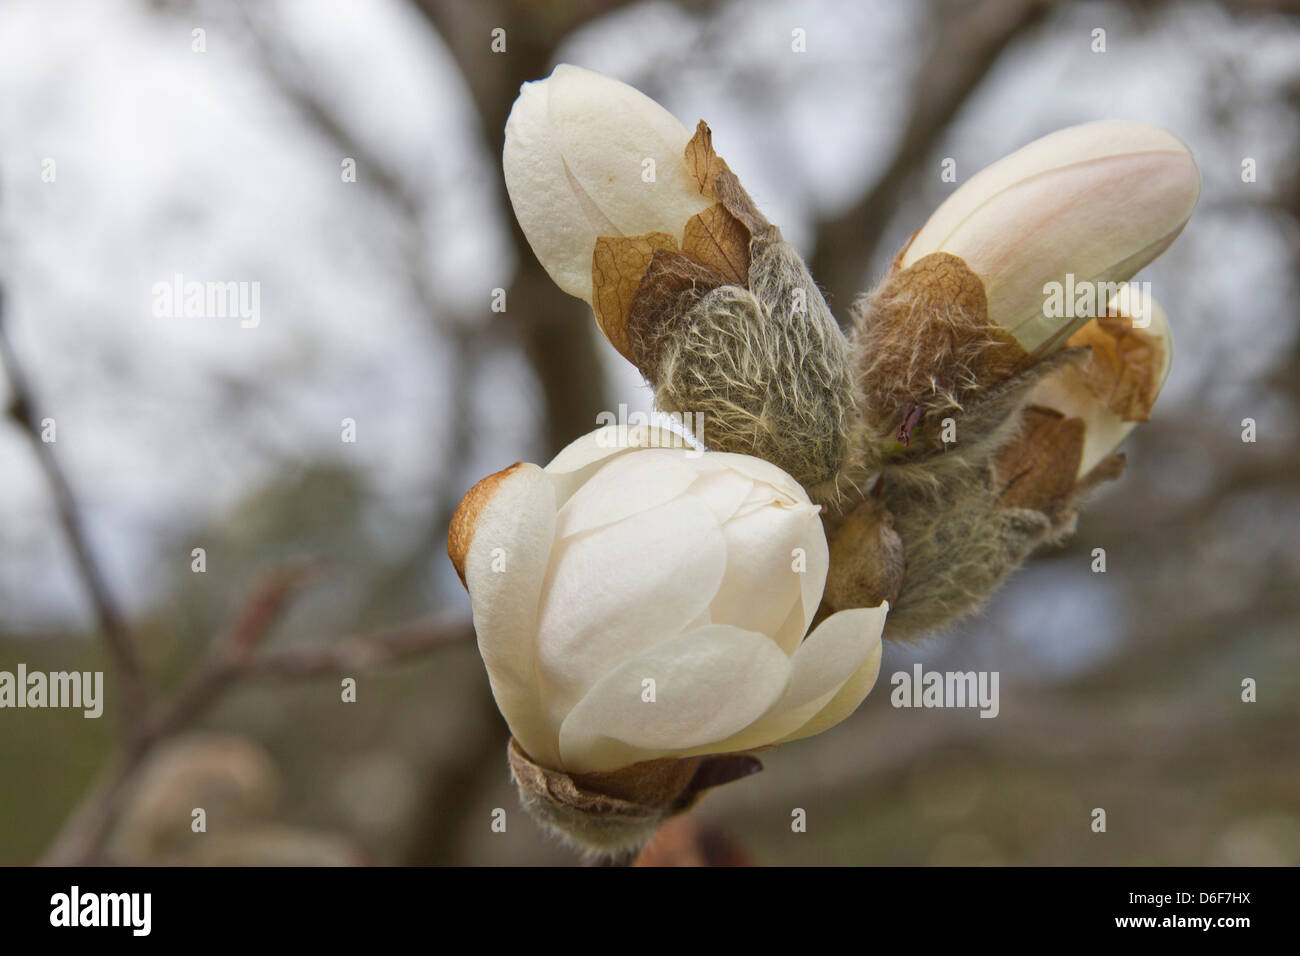 Close up of Royal Star Magnolia tree blossoms in early spring Stock Photo